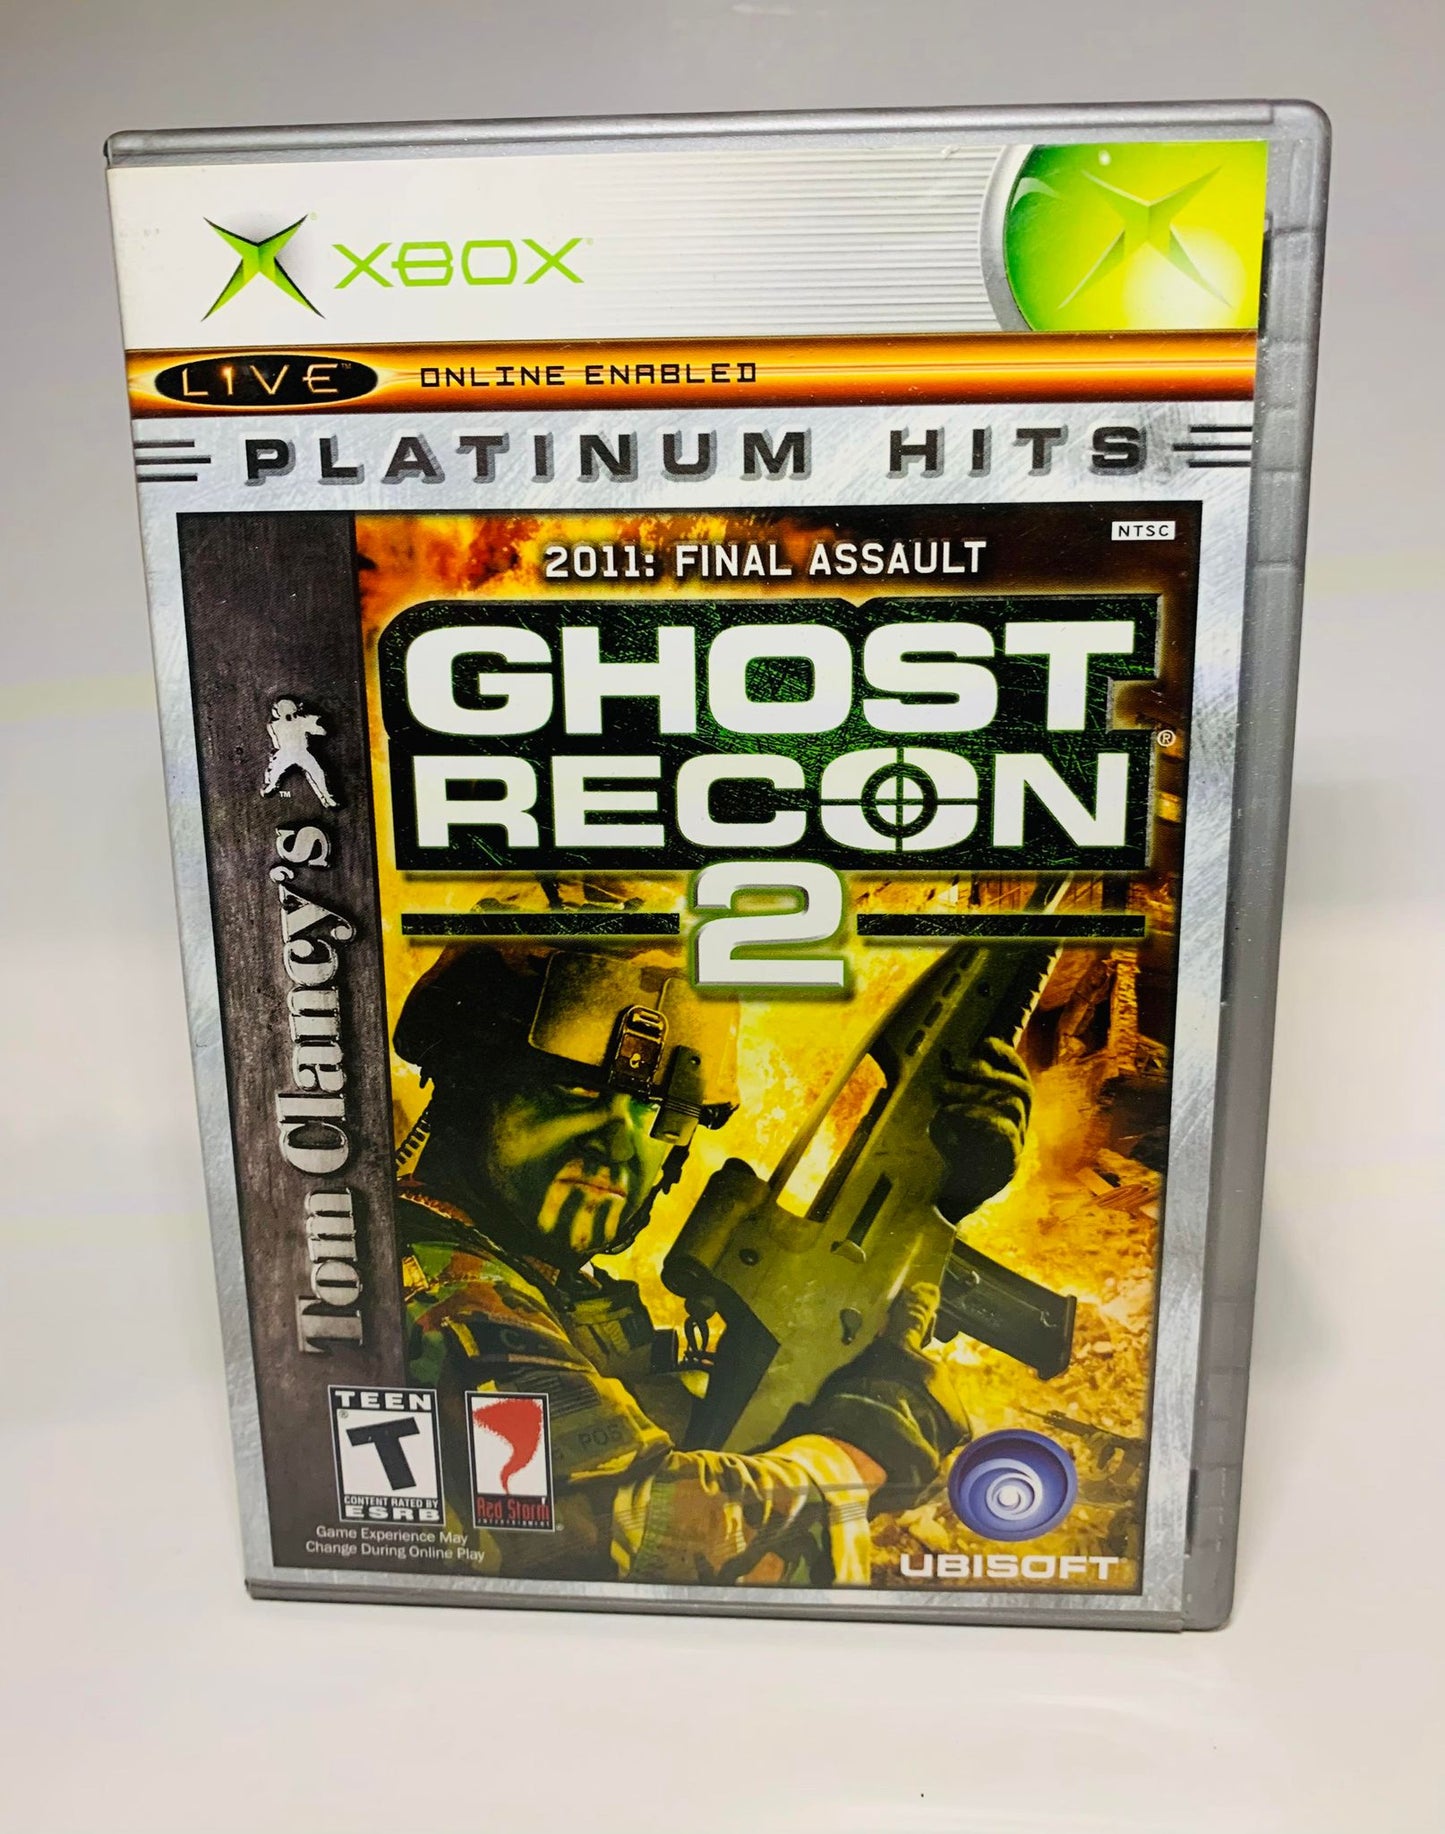 TOM CLANCY'S GHOST RECON 2 PLATINUM HITS (XBOX) - jeux video game-x